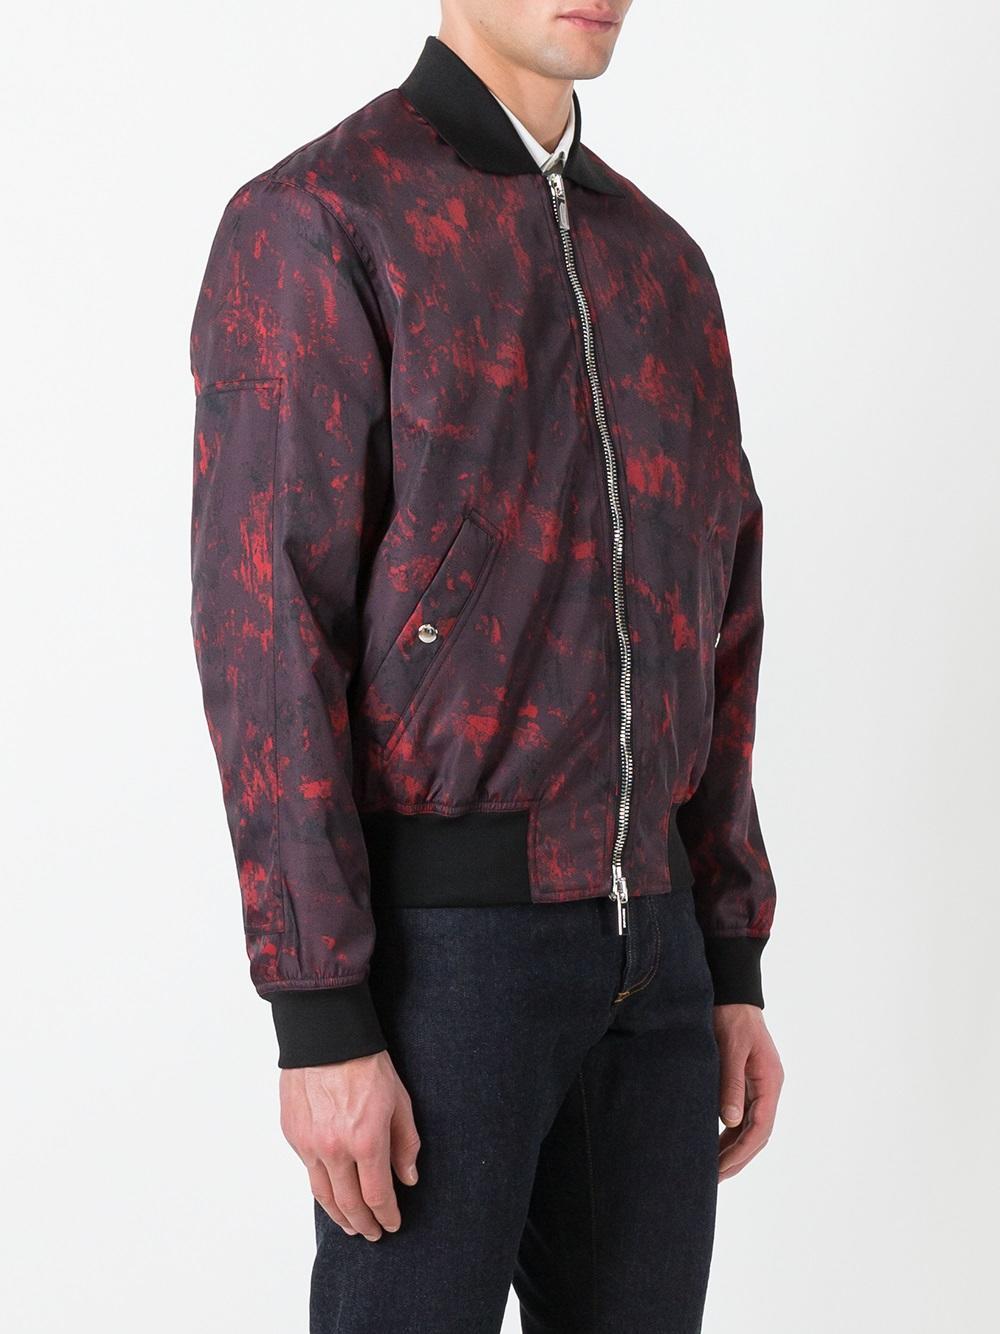 Dior Homme Abstract Print Bomber Jacket in Red for Men